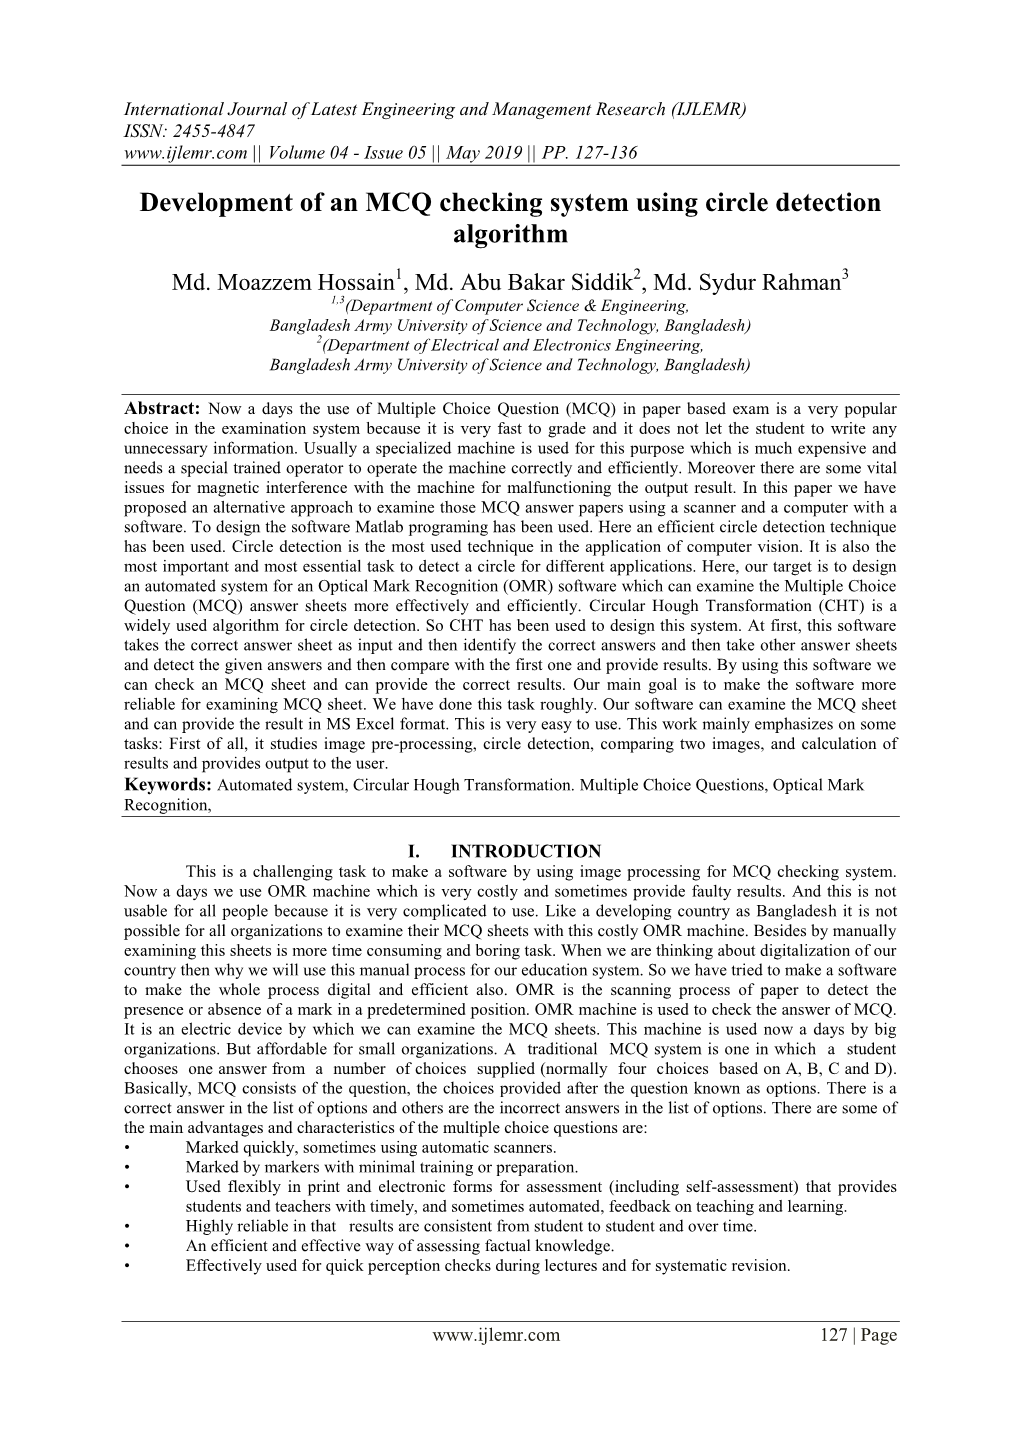 Development of an MCQ Checking System Using Circle Detection Algorithm